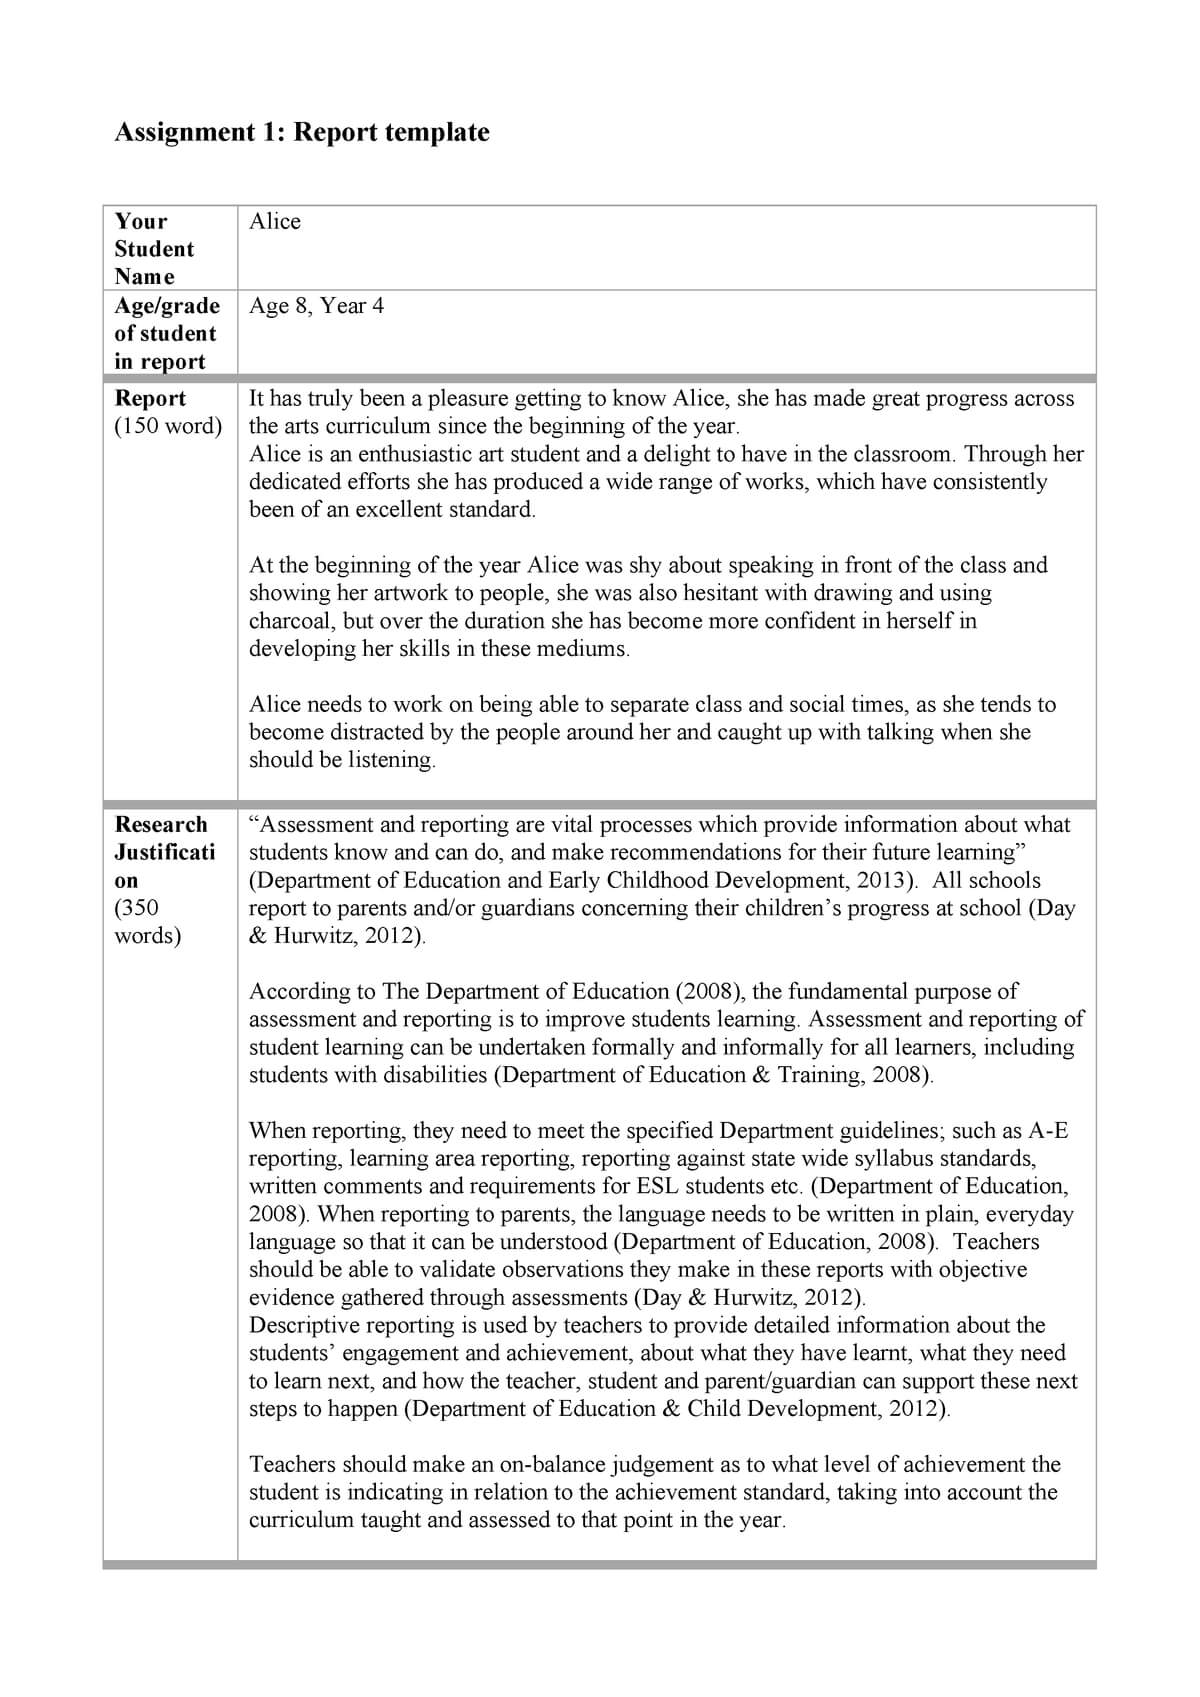 Report Template – Assignment – 6890: Arts Education 2 – Studocu With Assignment Report Template